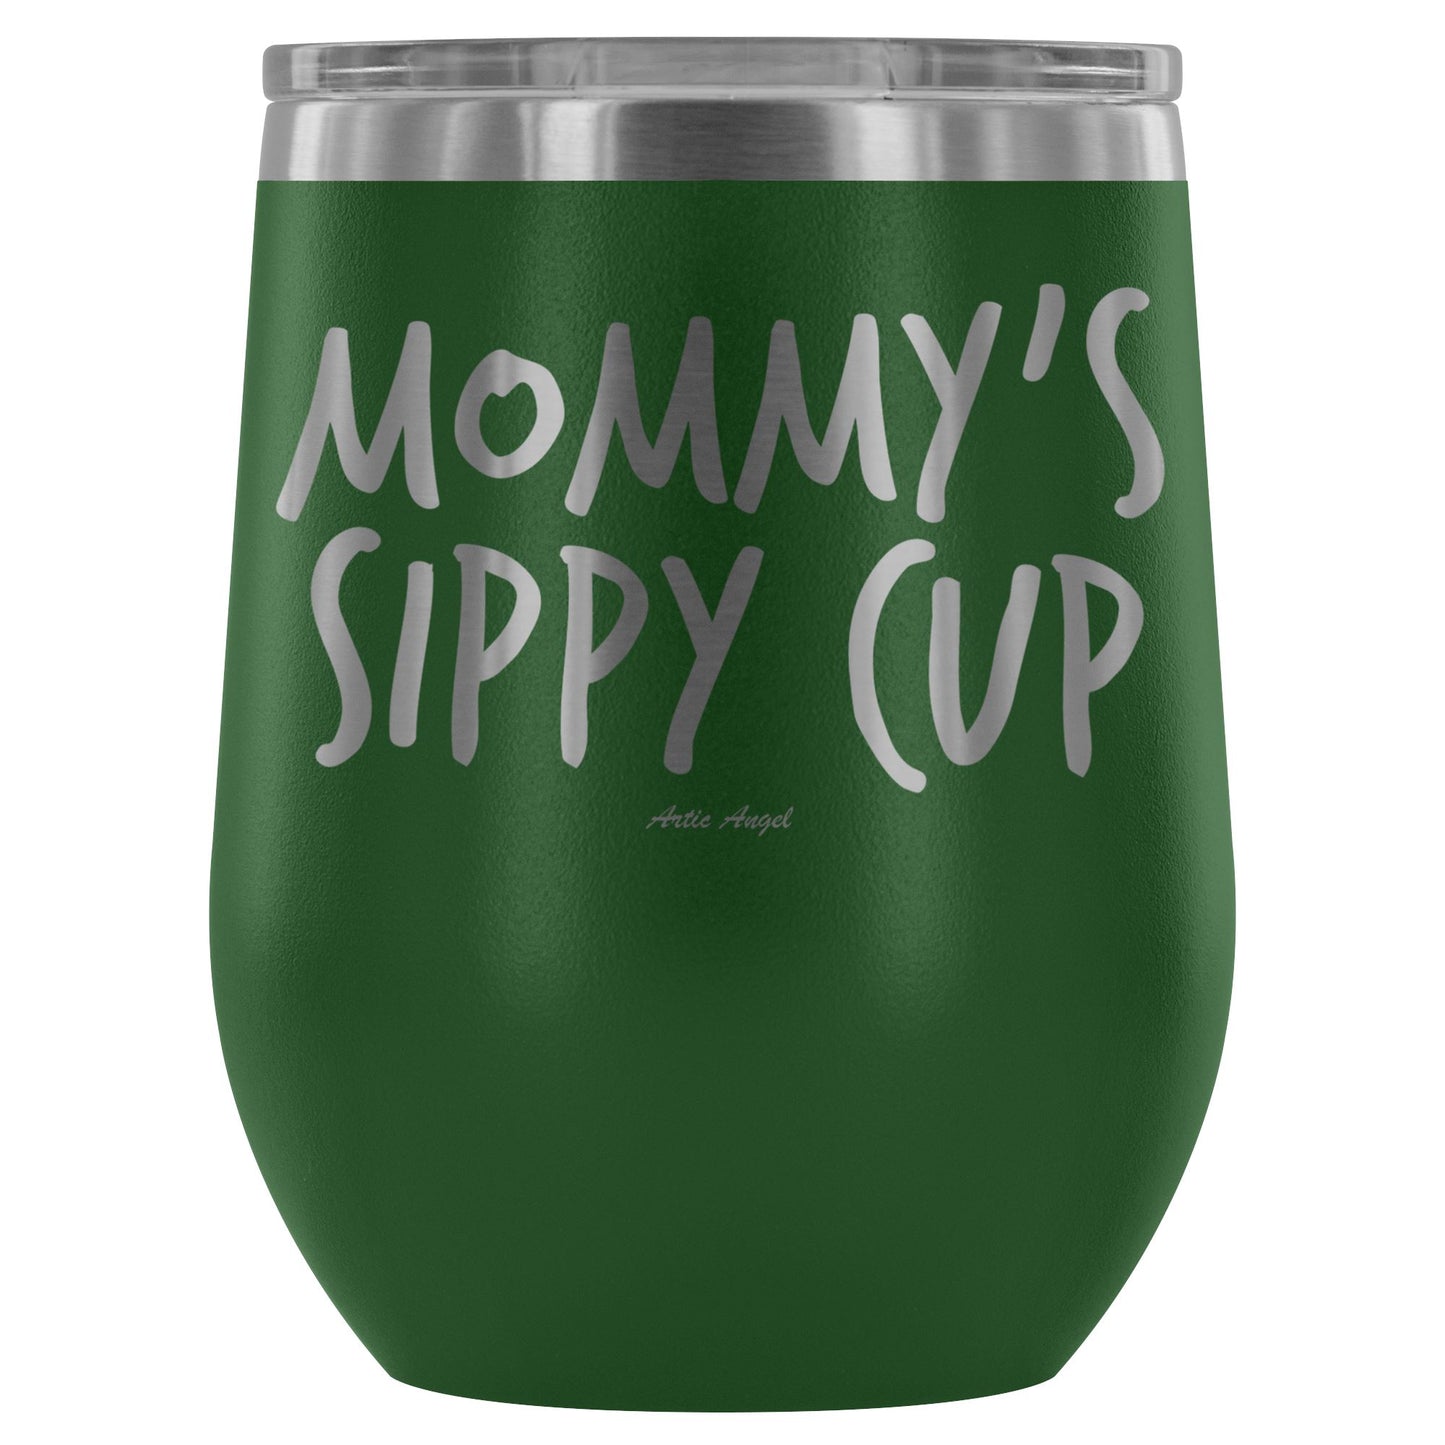 "Mommy's Sippy Cup" - Stemless Wine Cup Wine Tumbler Green 